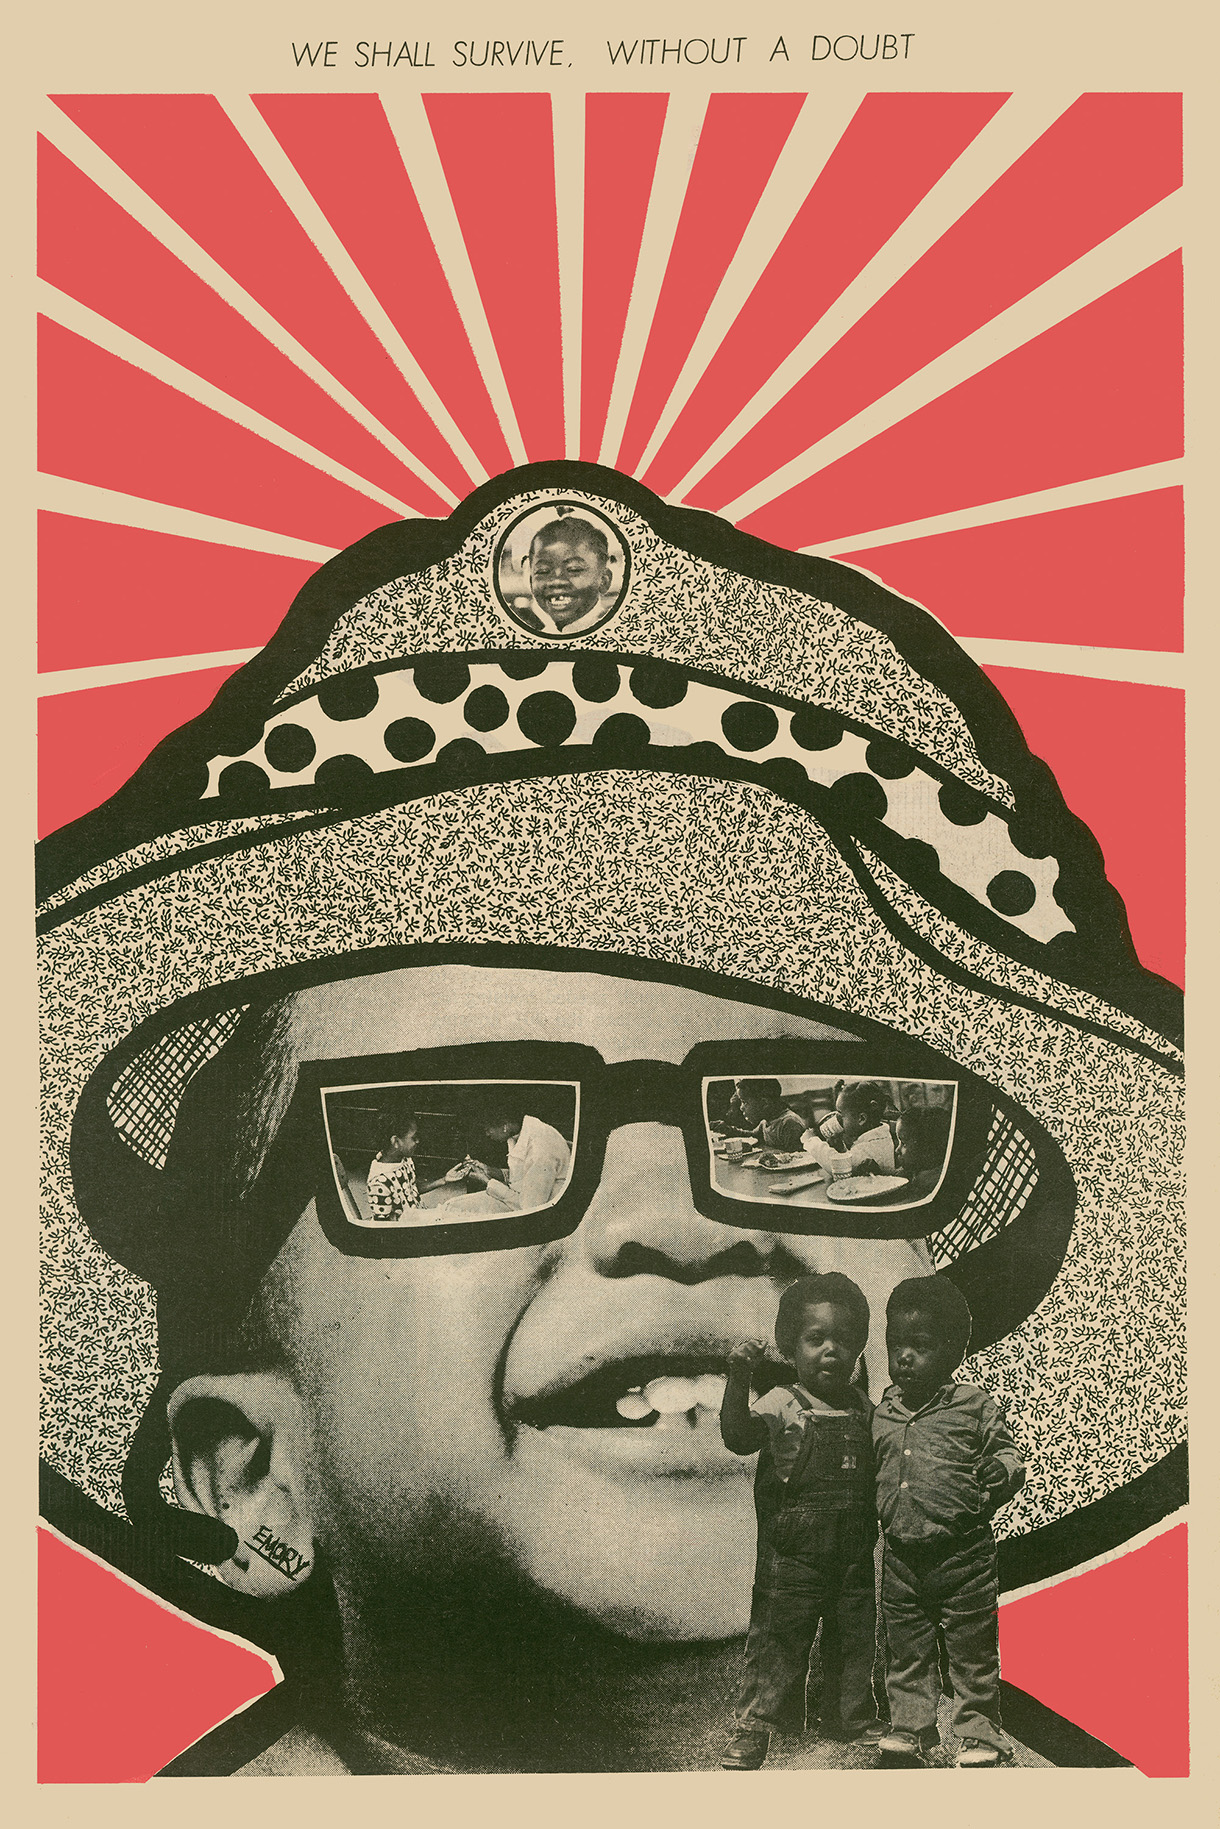 Emory Douglas, ‘We shall survive. Without a doubt’, 1971. Image courtesy of the Tate